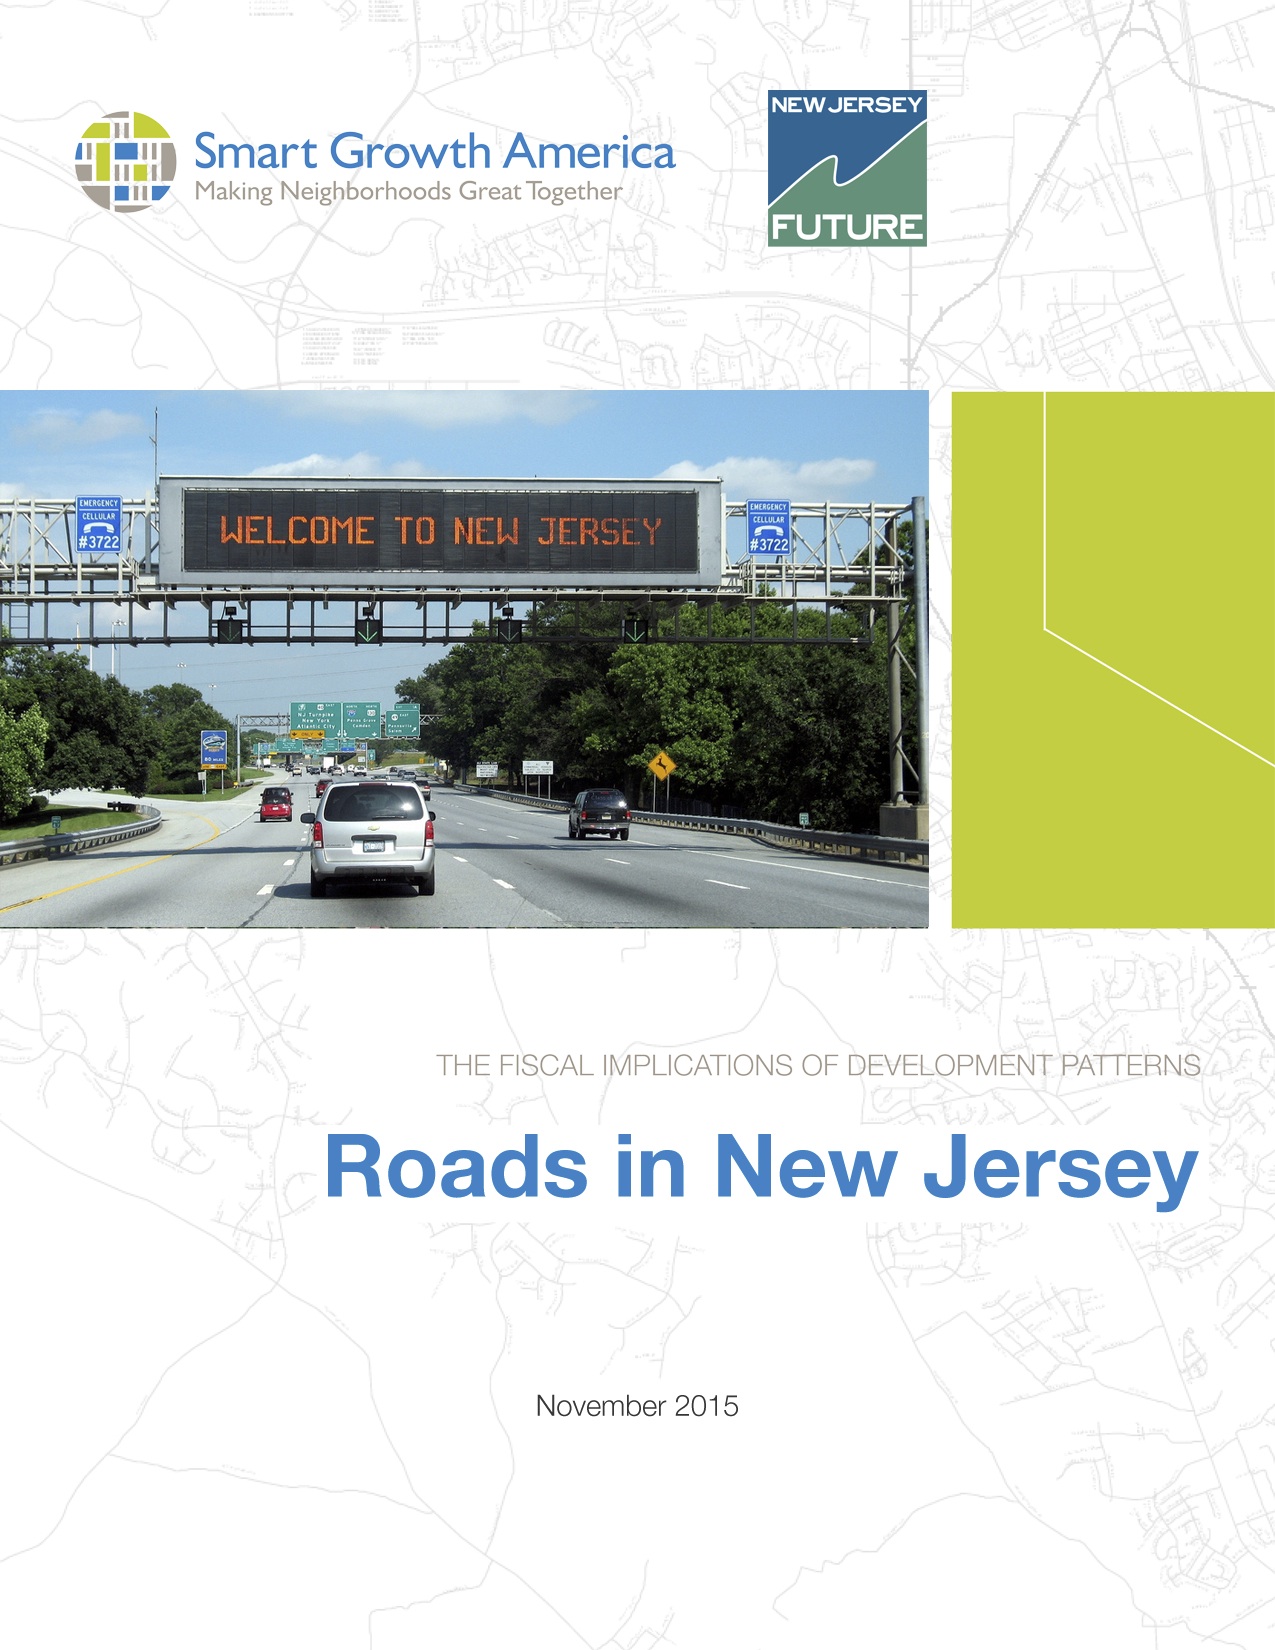 The Fiscal Implications: Roads in New Jersey